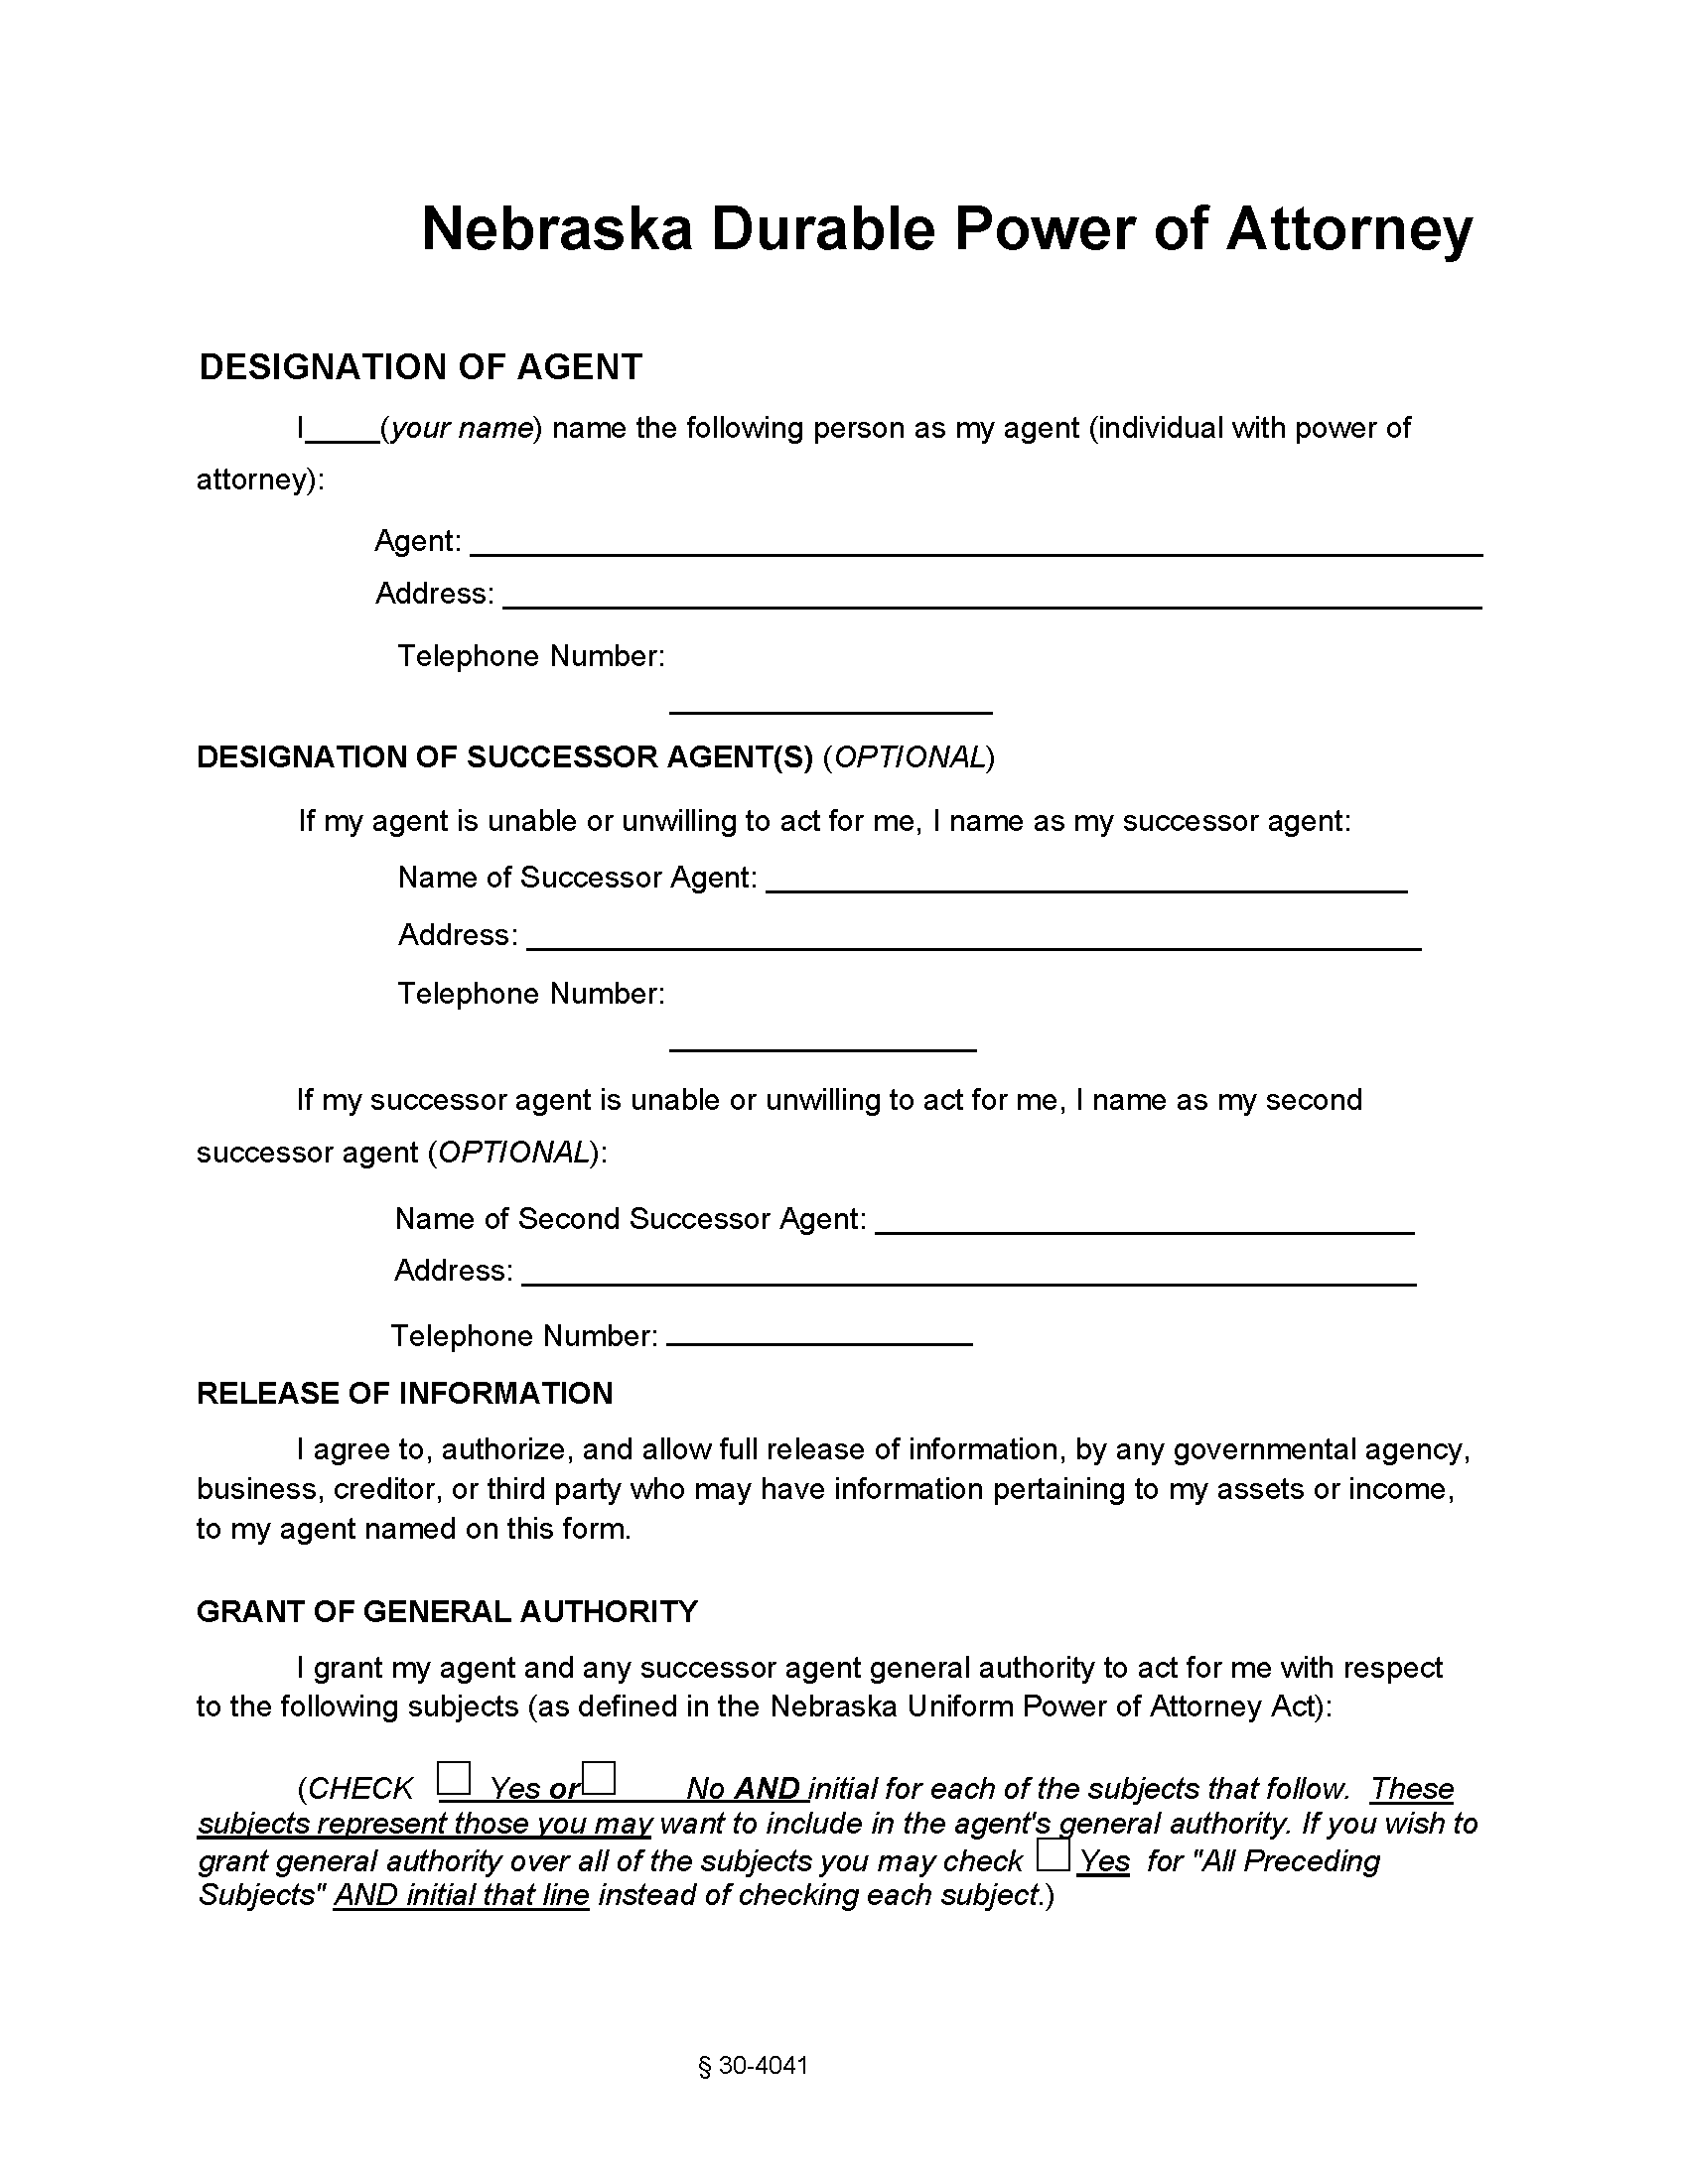 nebraska-financial-power-of-attorney-form-fillable-pdf-free-printable-legal-forms